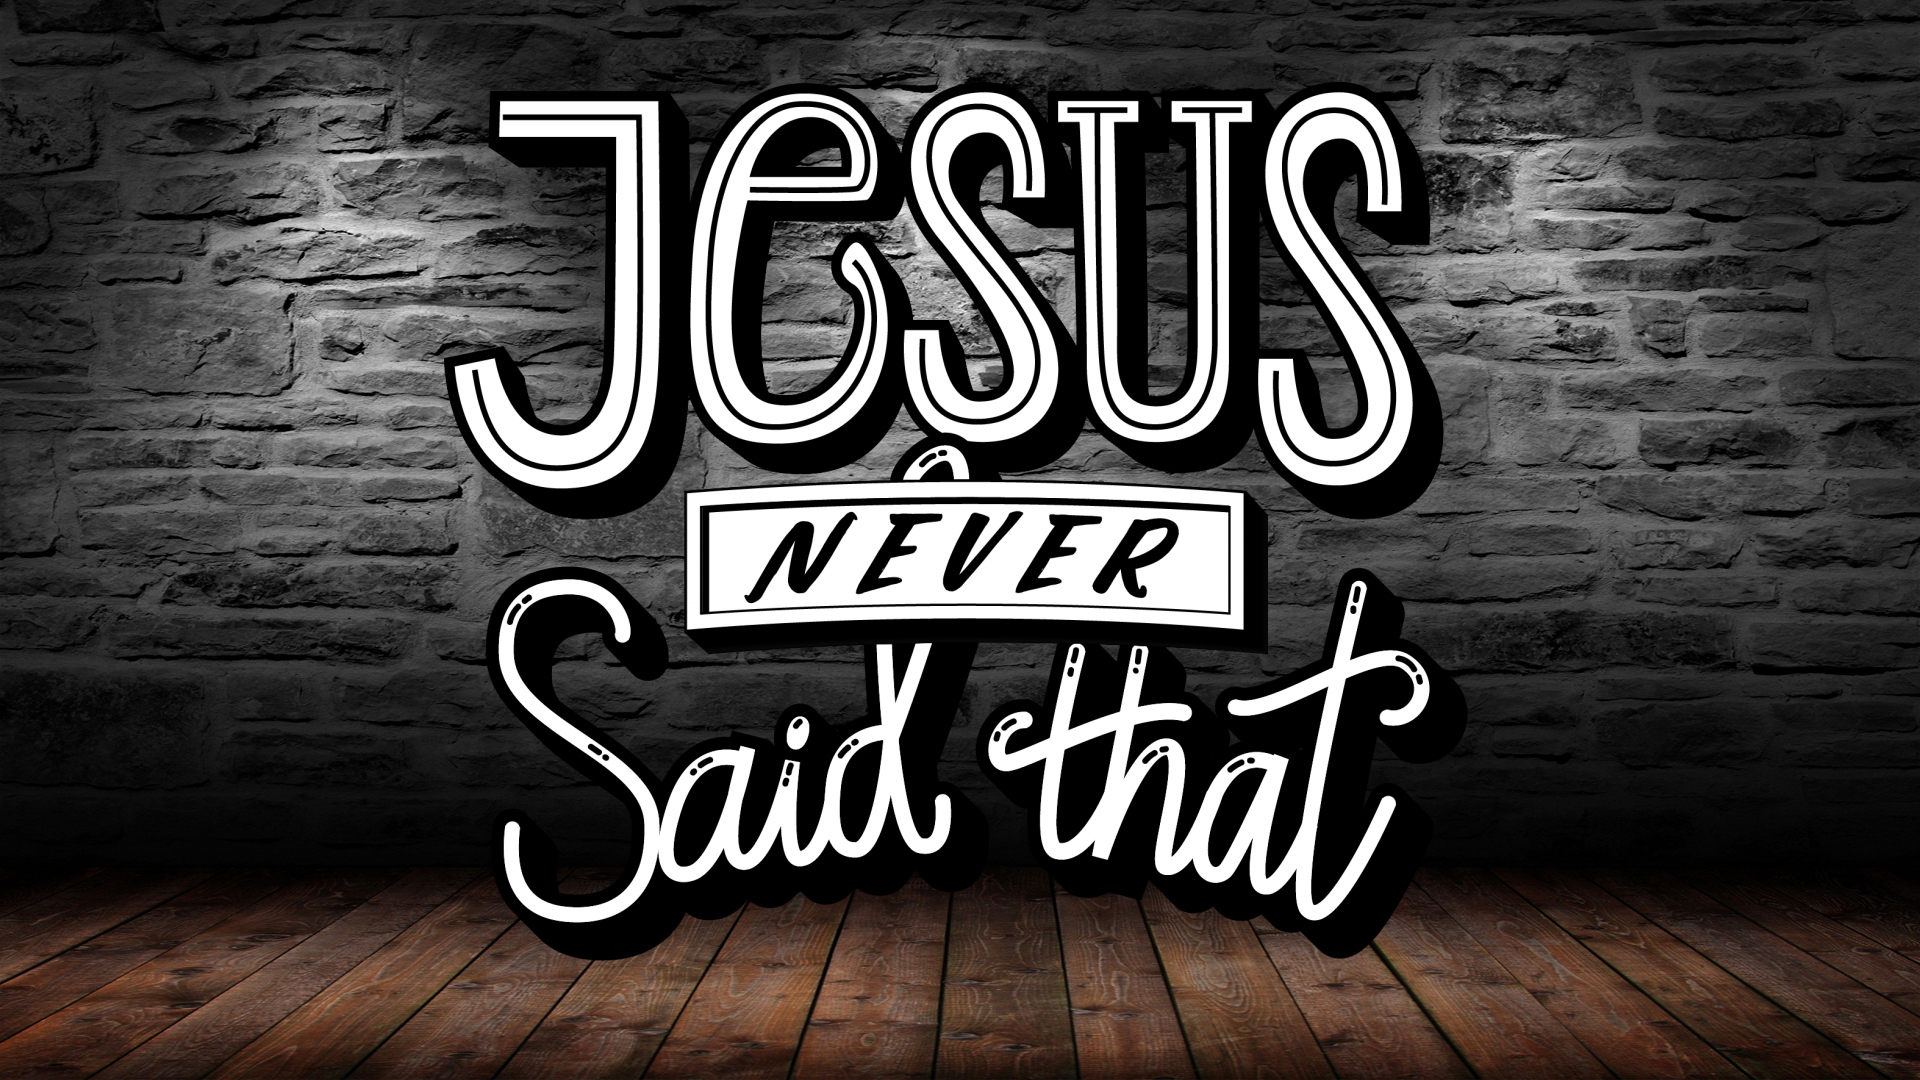 “Things Jesus never said…well this one He did!”